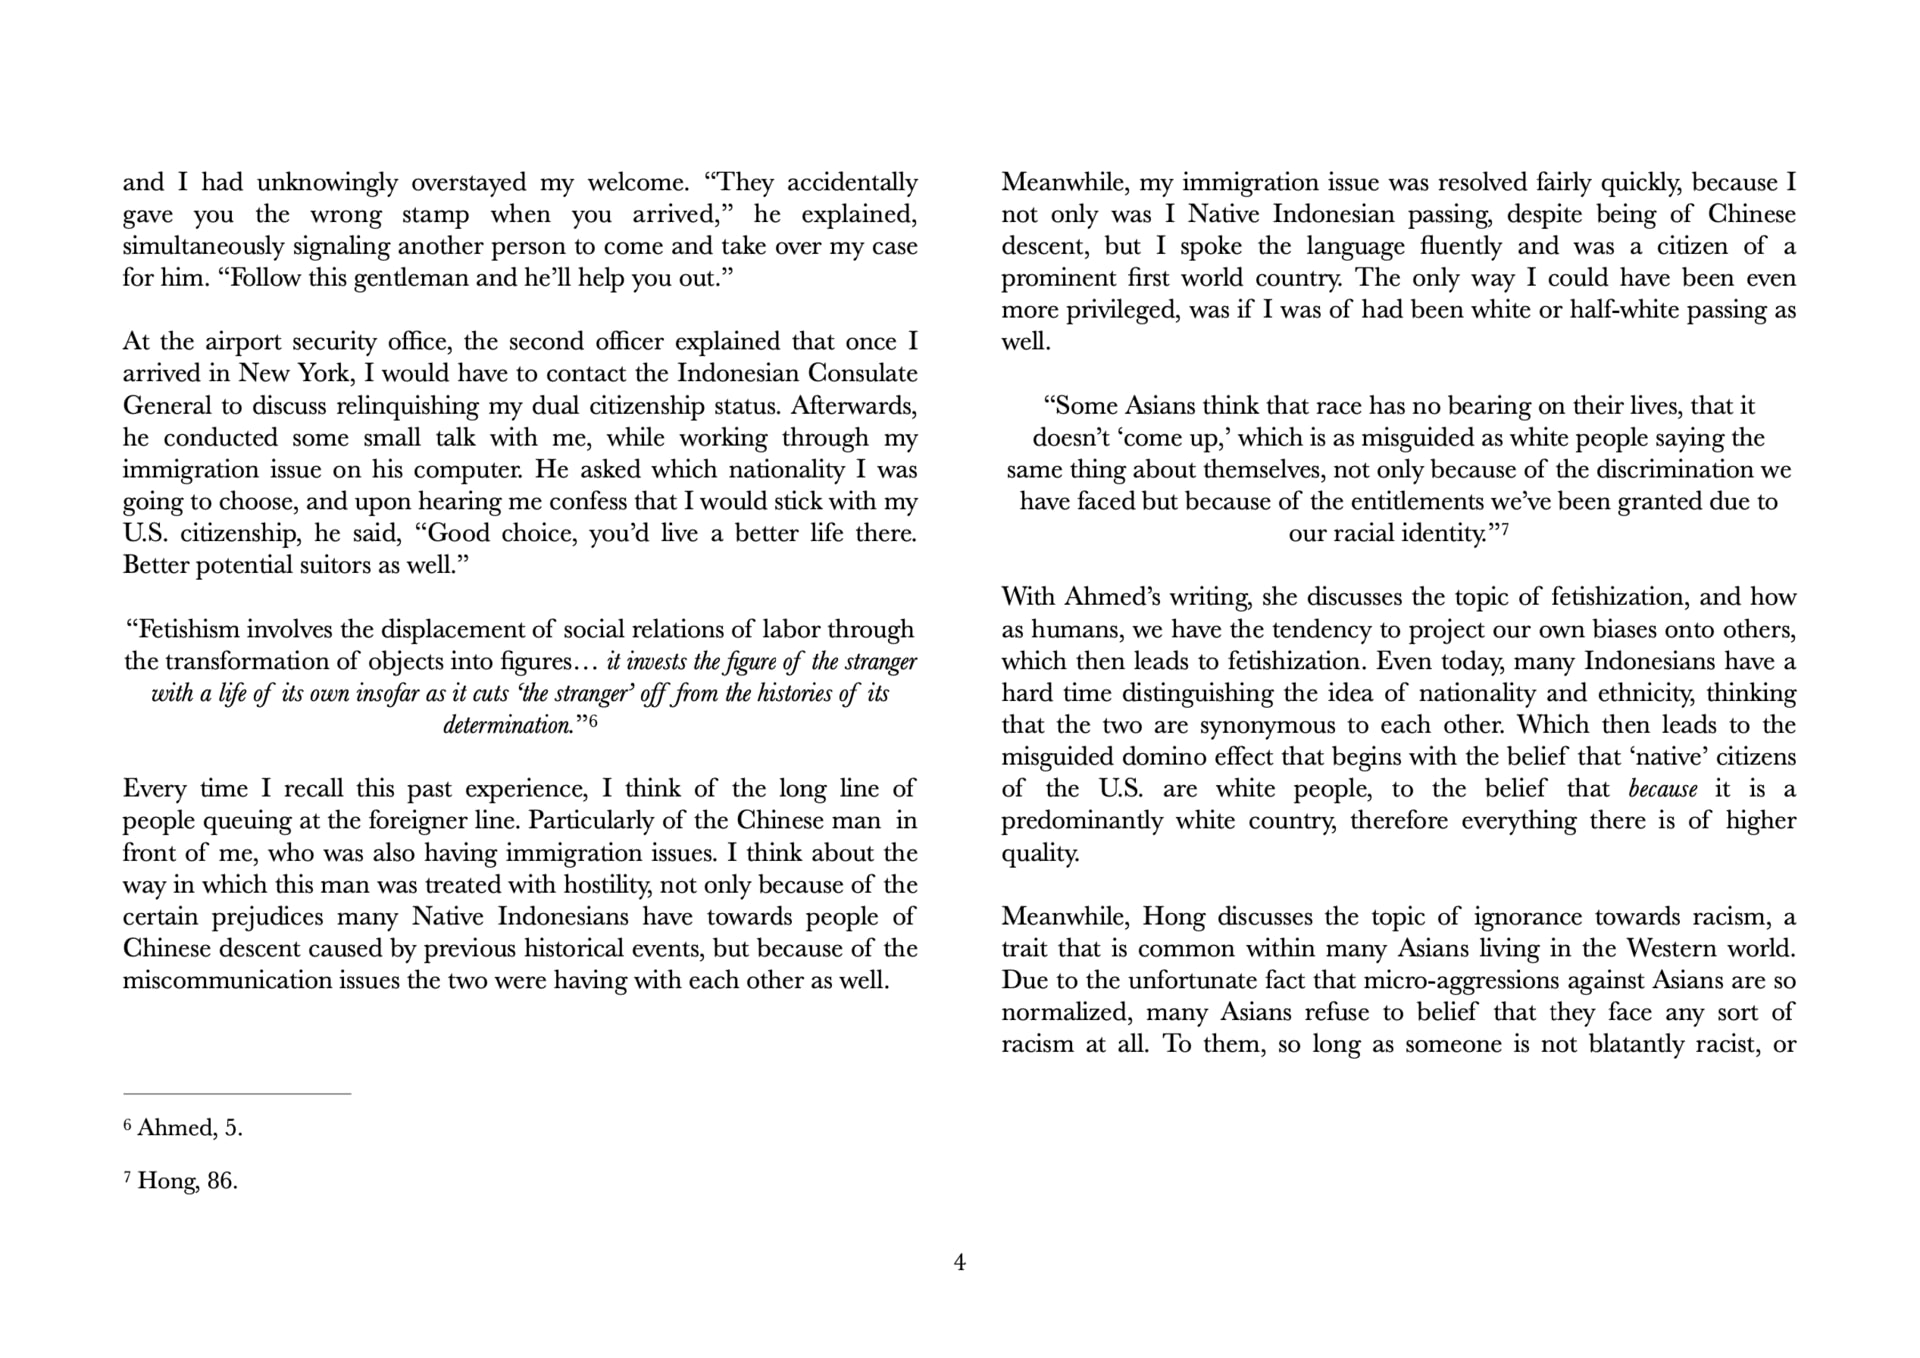 Image of page four, second section of airports part 2 soekarno hatta international airport